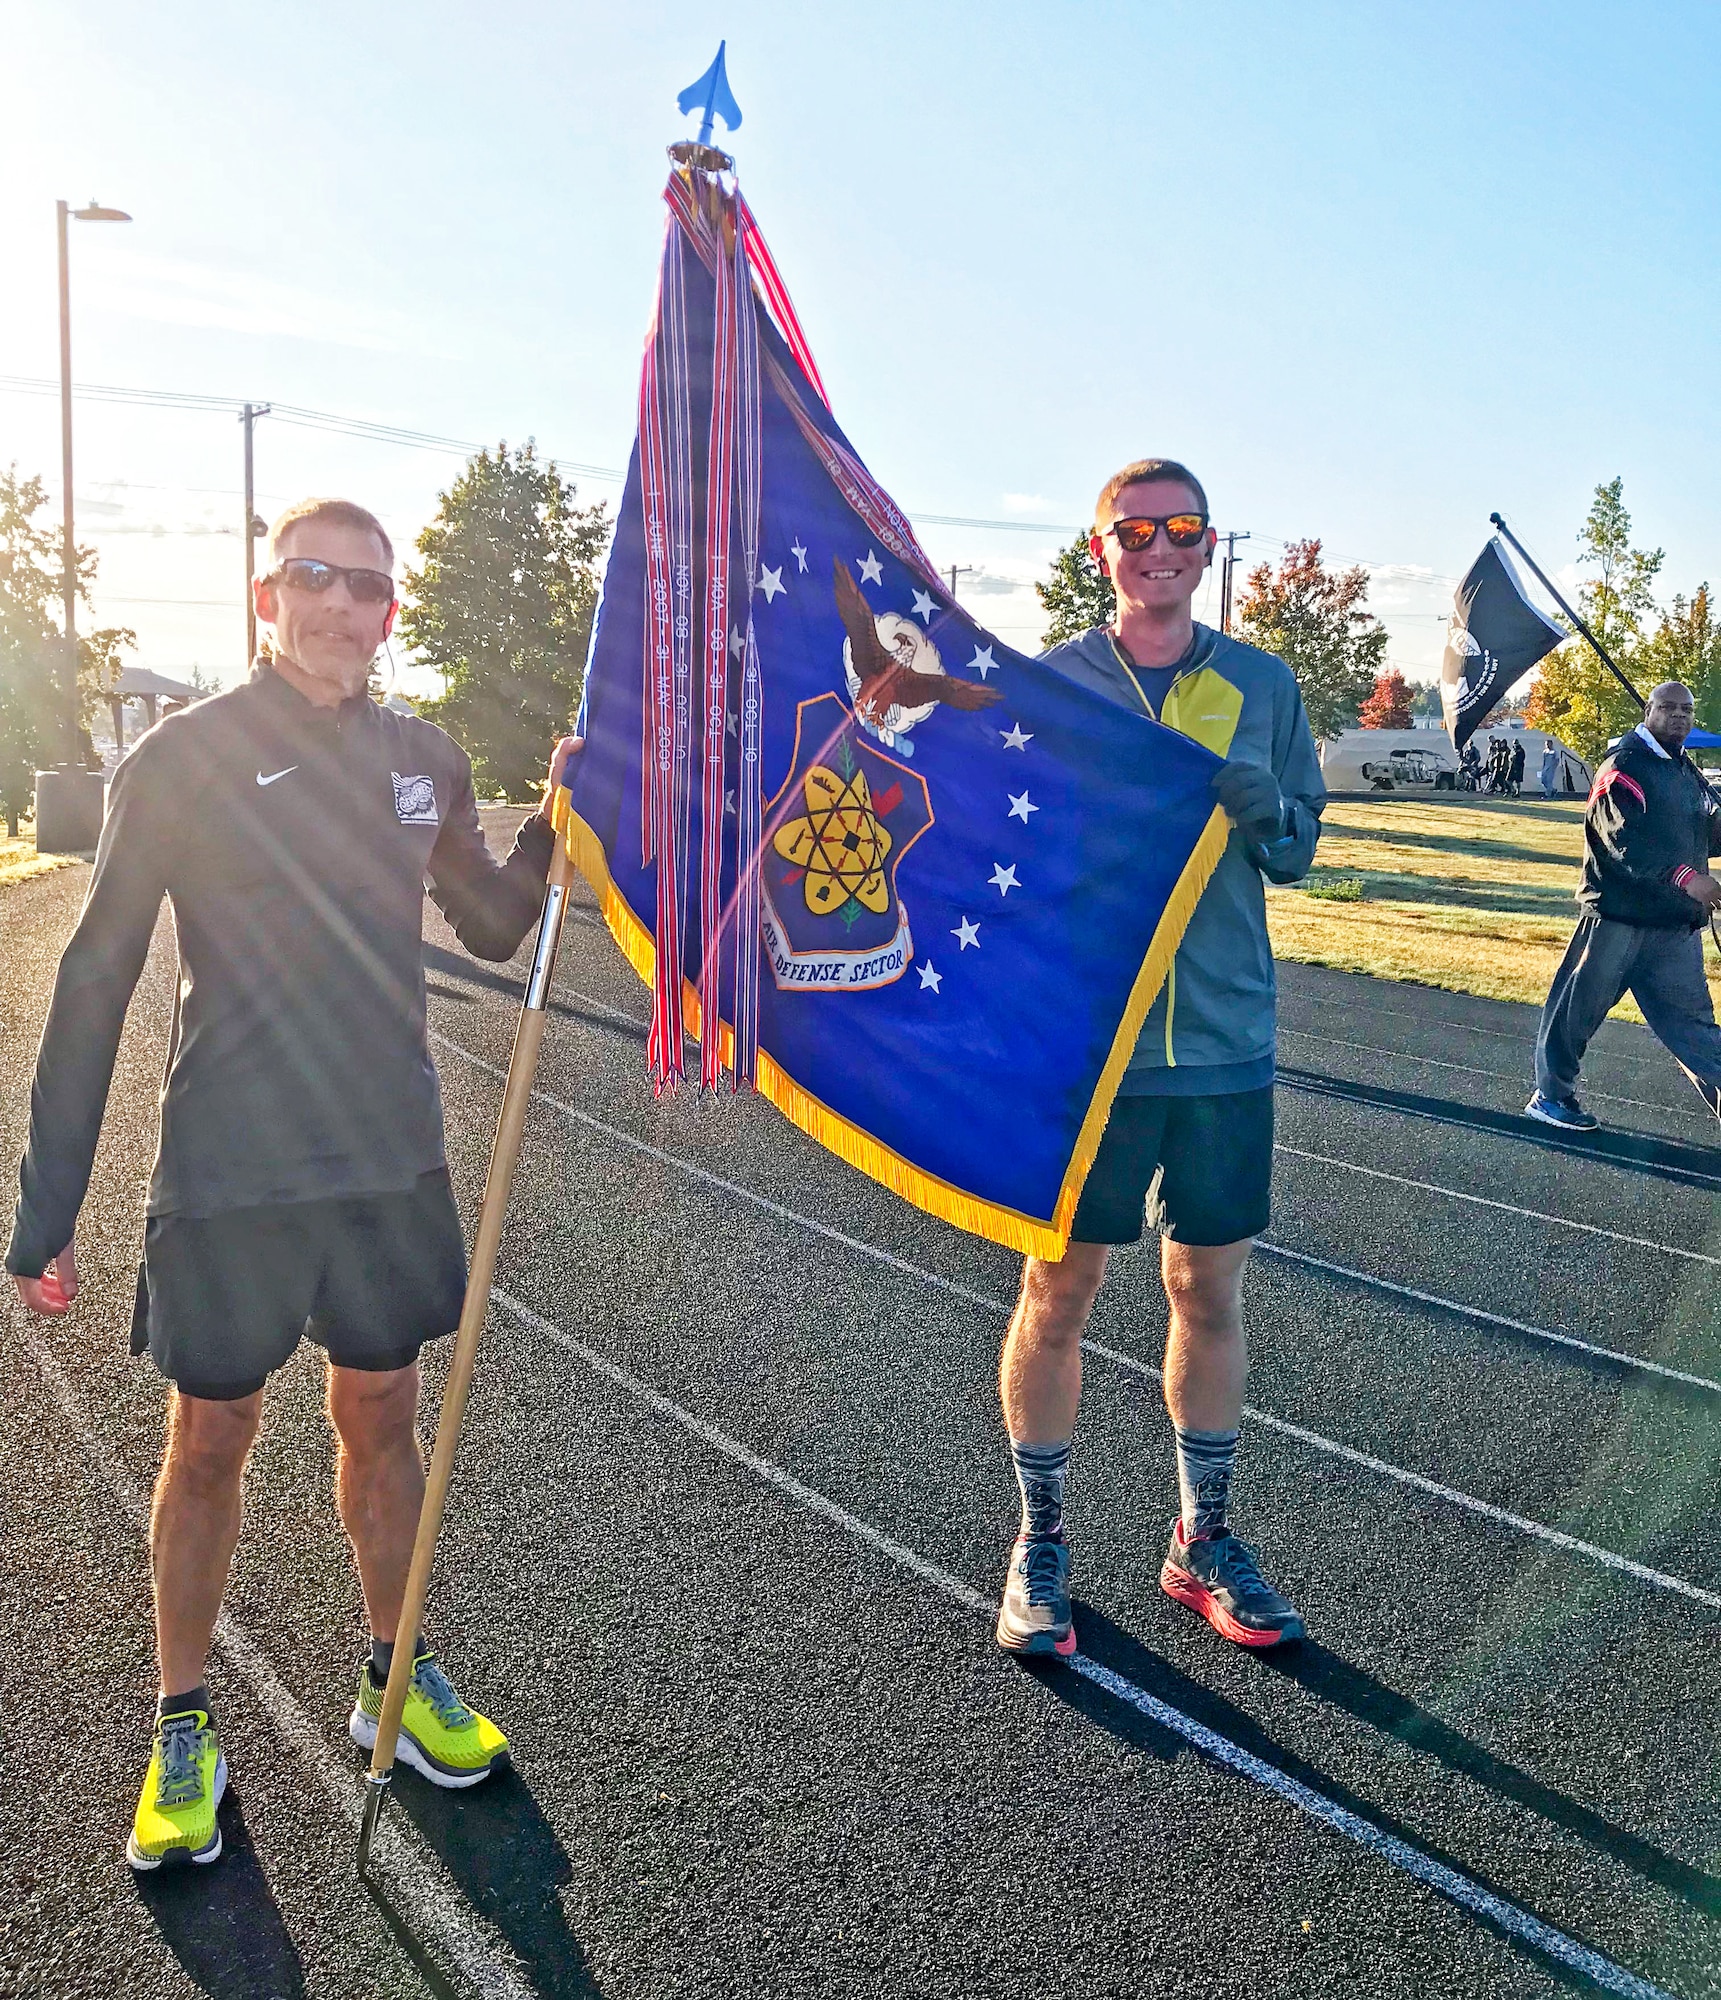 Bruce Robie, left, 225th Support Squadron National Airspace System Defense program manager, and 1st Lt. Krosby Keller, right, 225th Air Defense Squadron air battle manager, proudly hold the Western Air Defense Sector colors after completing 174 miles between them during the Joint Base Lewis-McChord 24-Hour POW/MIA Remembrance Run Sept. 19, 2018.  Keller placed first in individual standings with 100 miles and Robie finished second with 74 miles. (Courtesy photo)